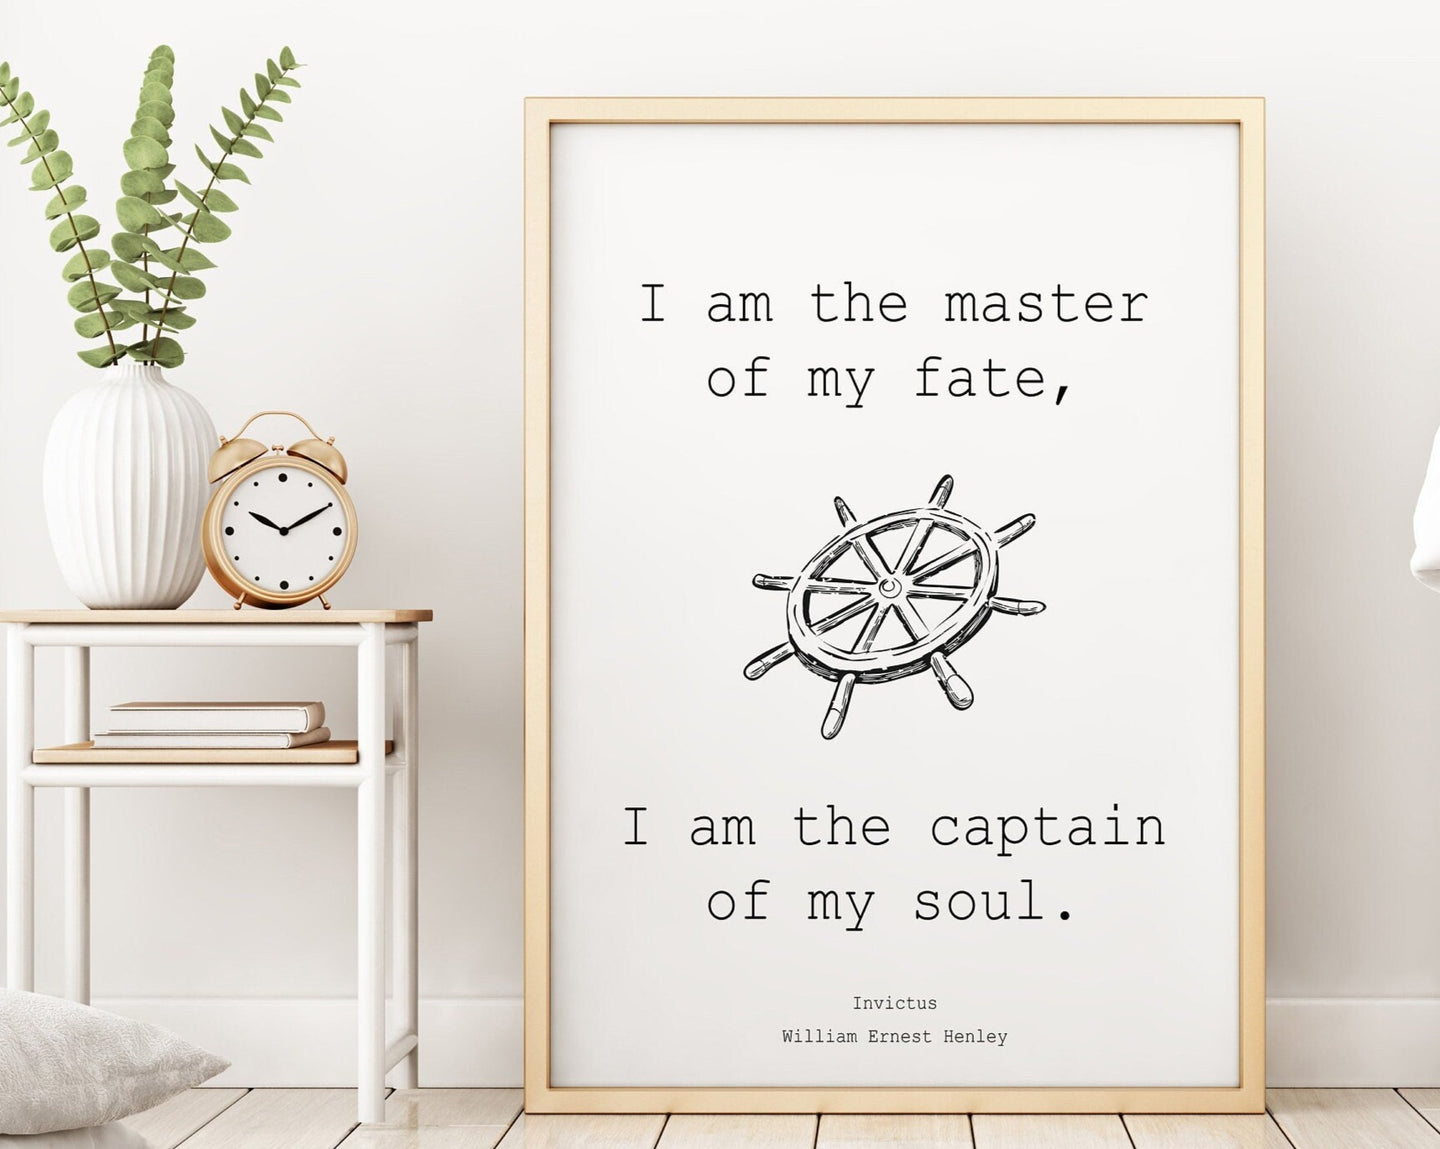 Invictus poem William Ernest Henley Poem Art Print office Wall Art poetry art - I am the master of my fate... captain of my soul.